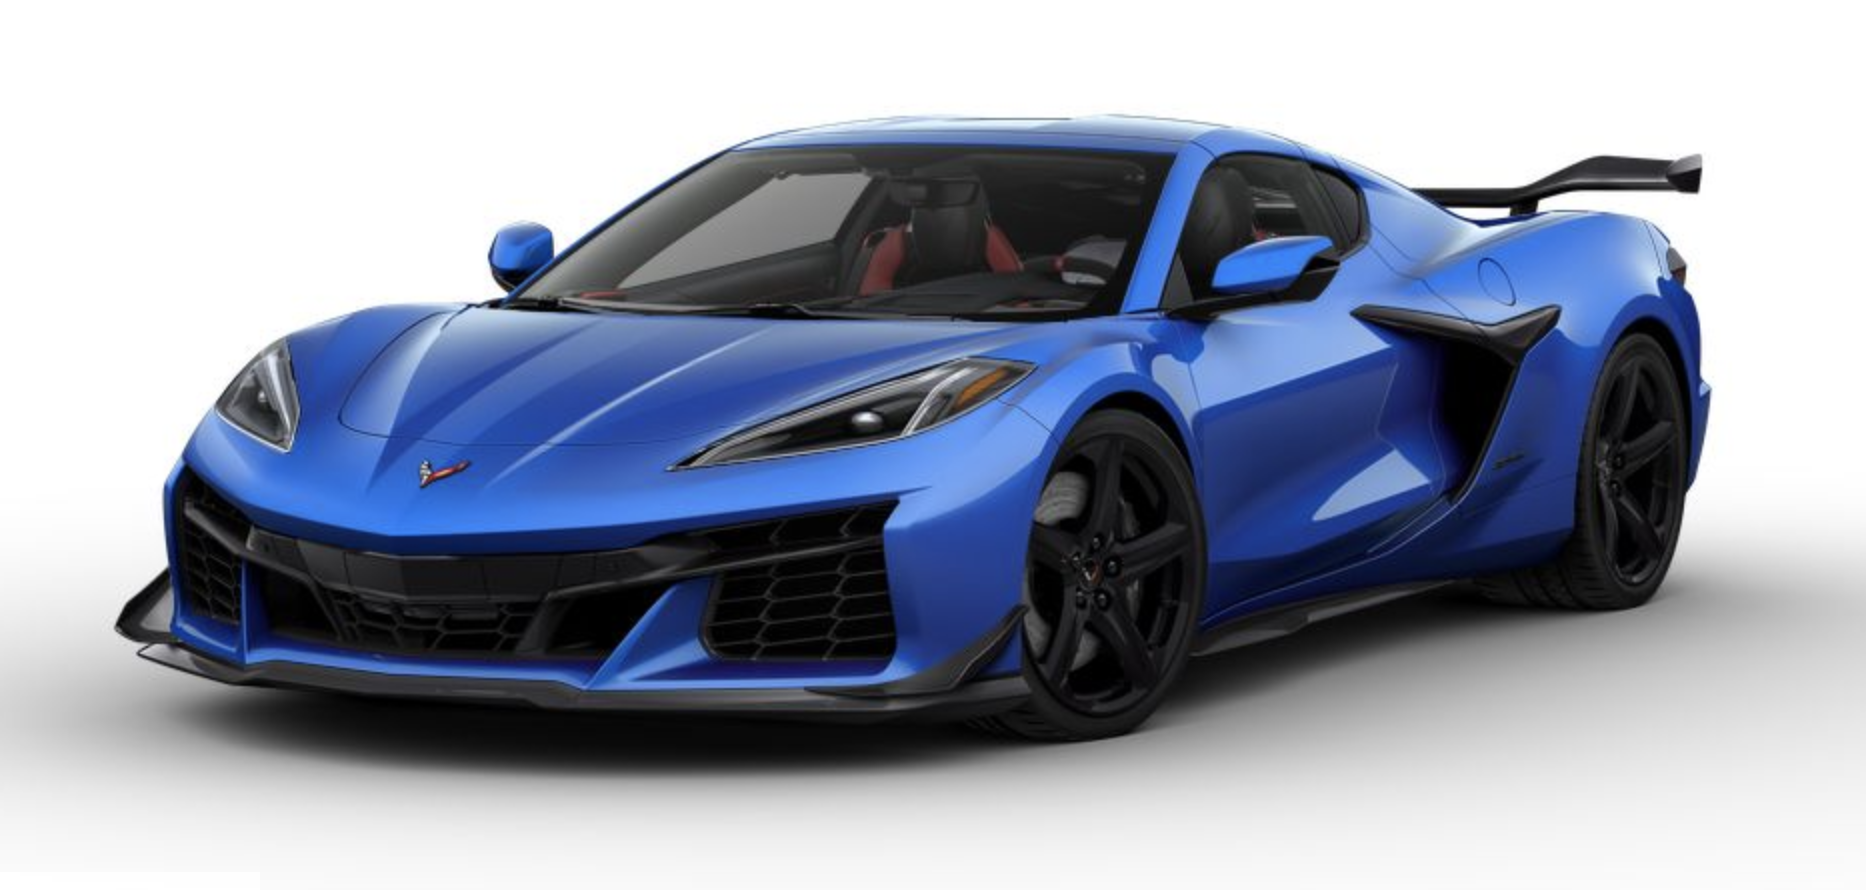 2023 Corvette Z06 Configurator With Pricing Goes Live